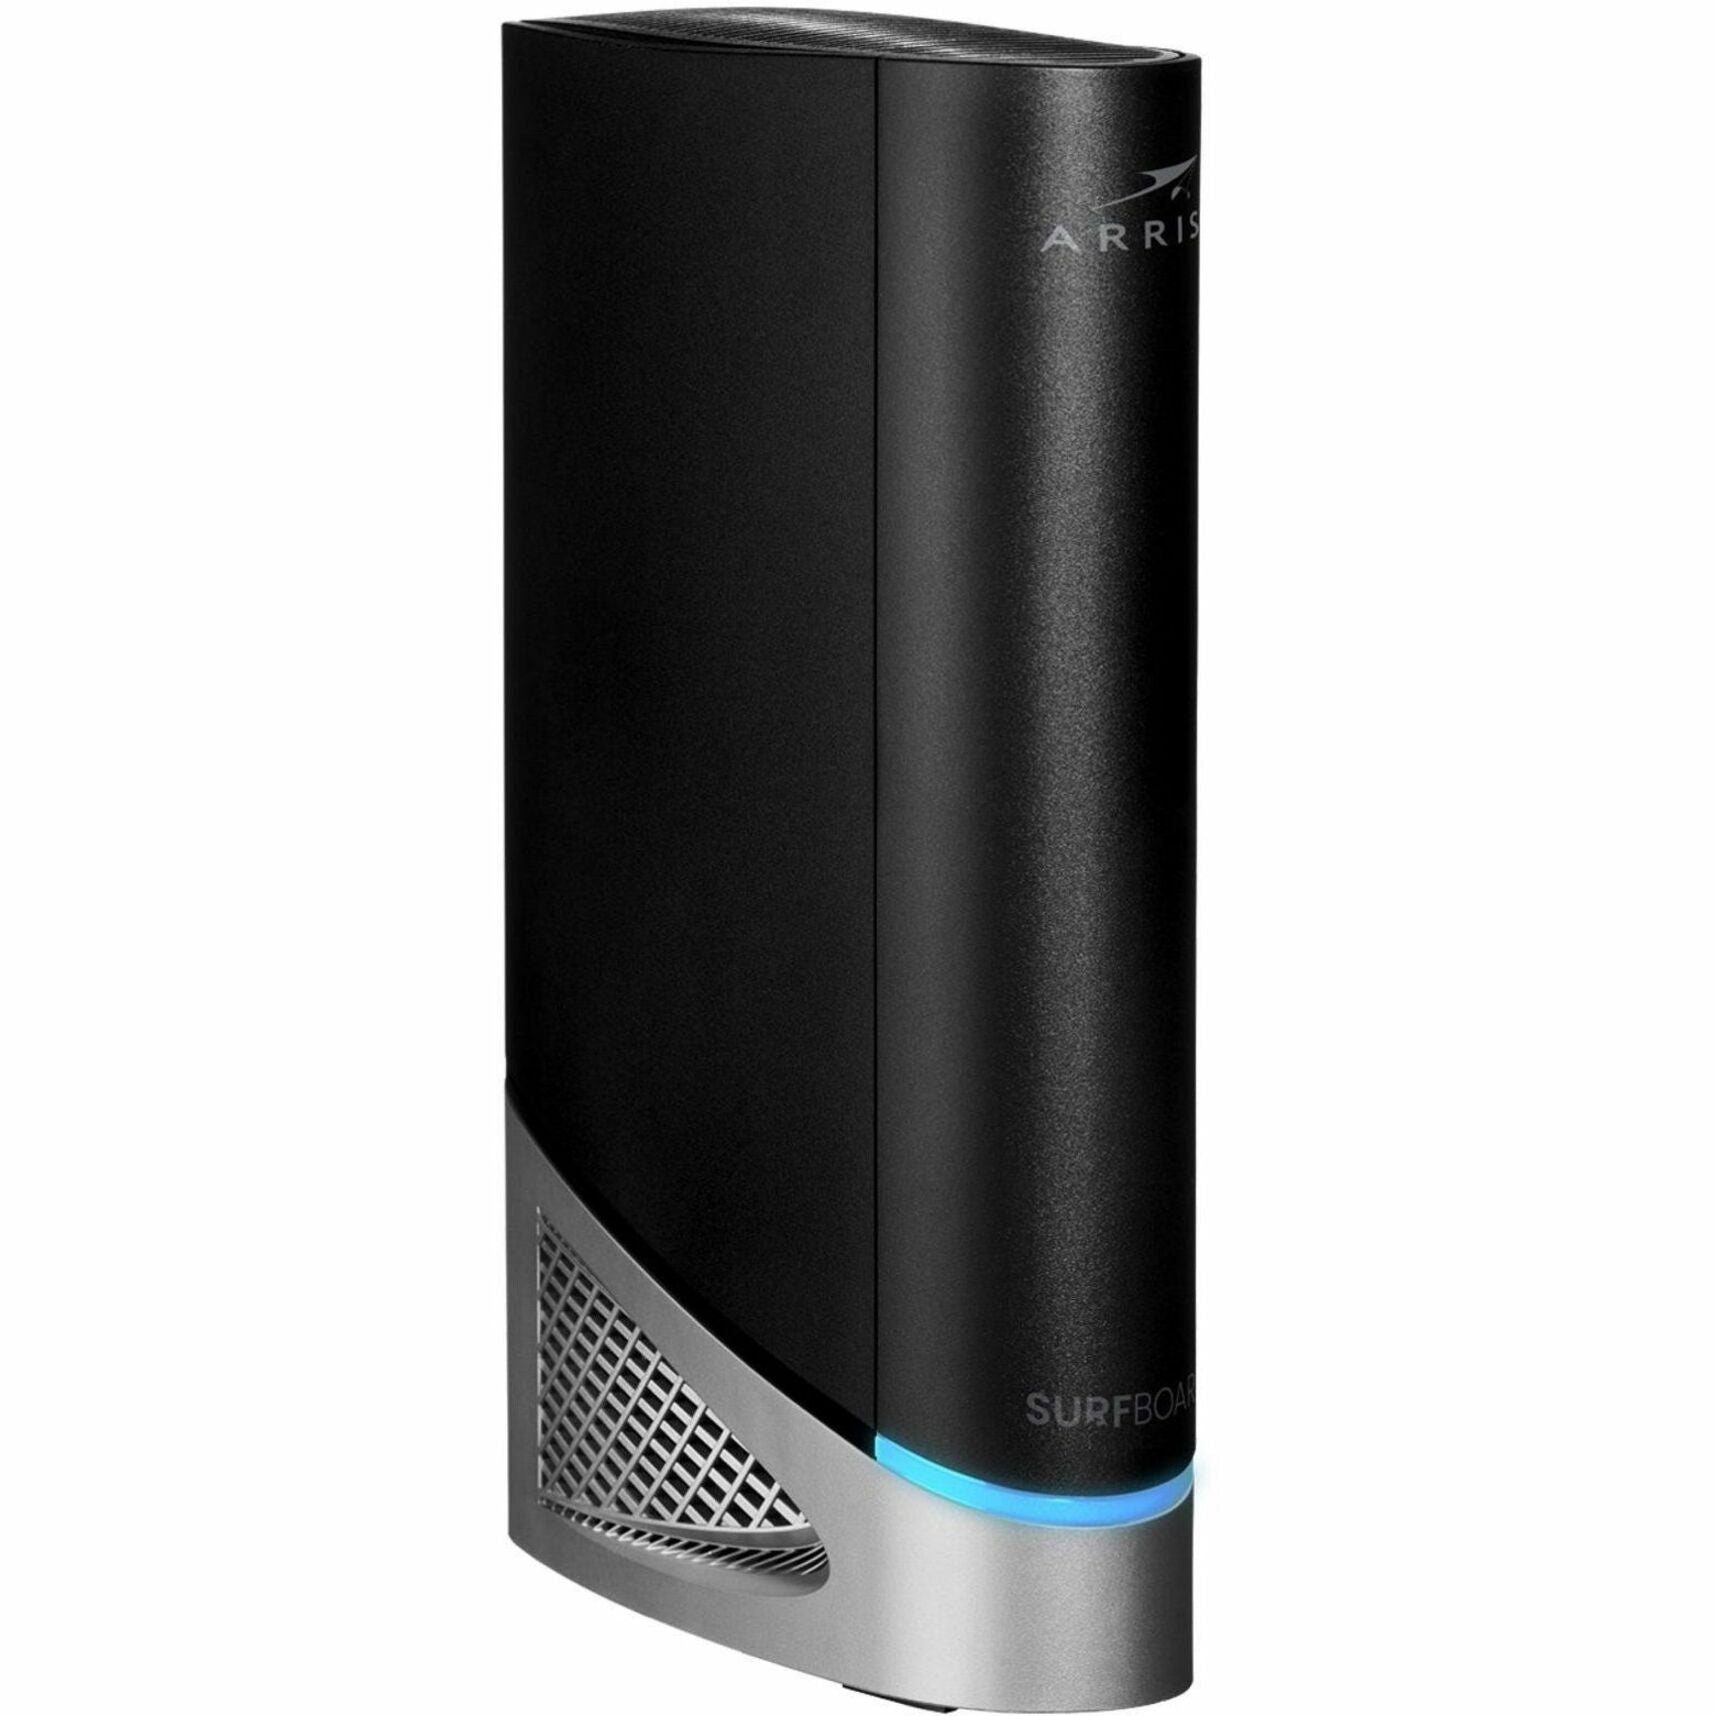 Surfboard G54 DOCSIS 3.1 Wi-Fi 7 Cable Modem